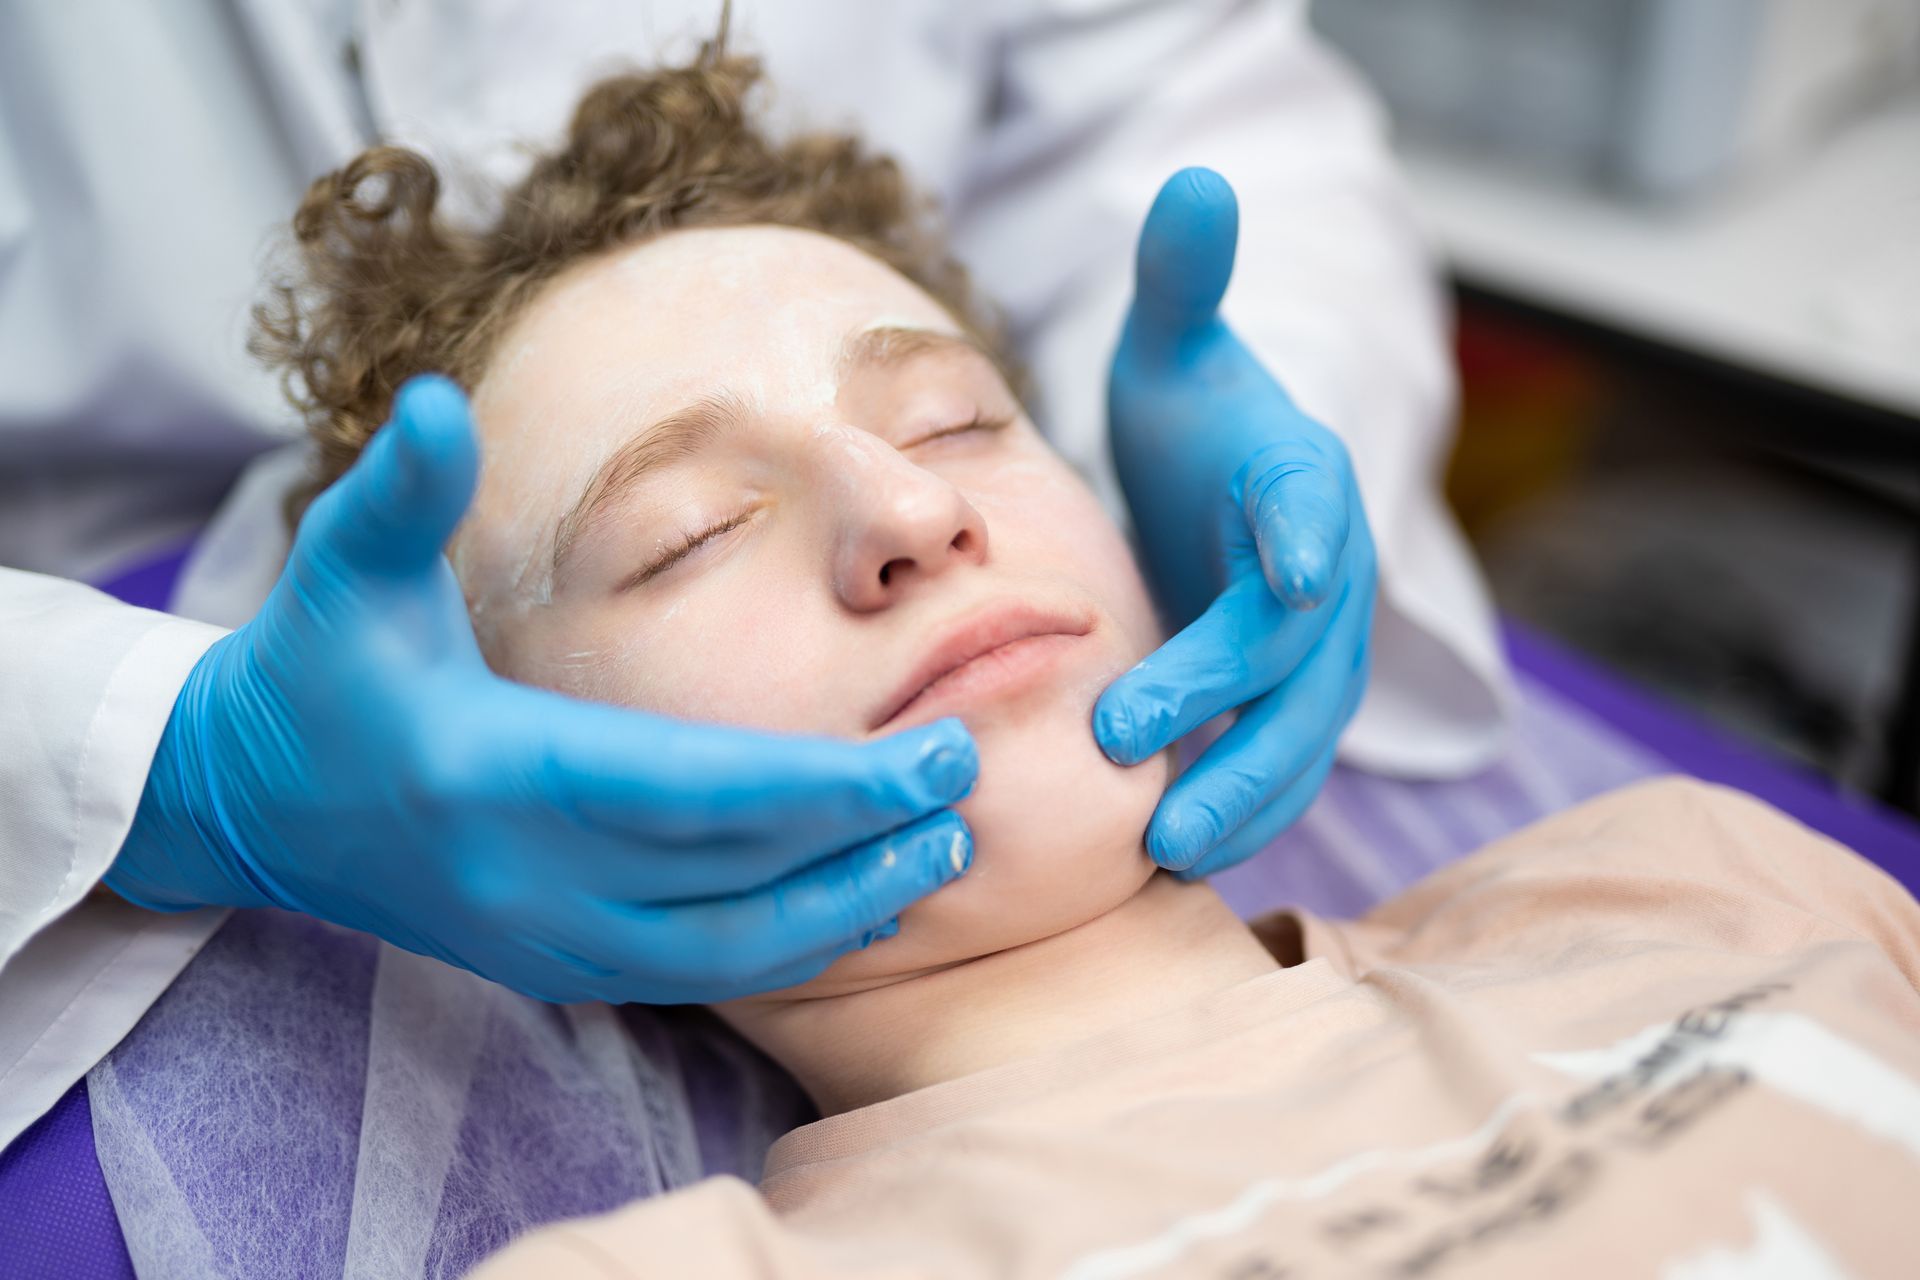 cosmetic surgery on minors in Ohio